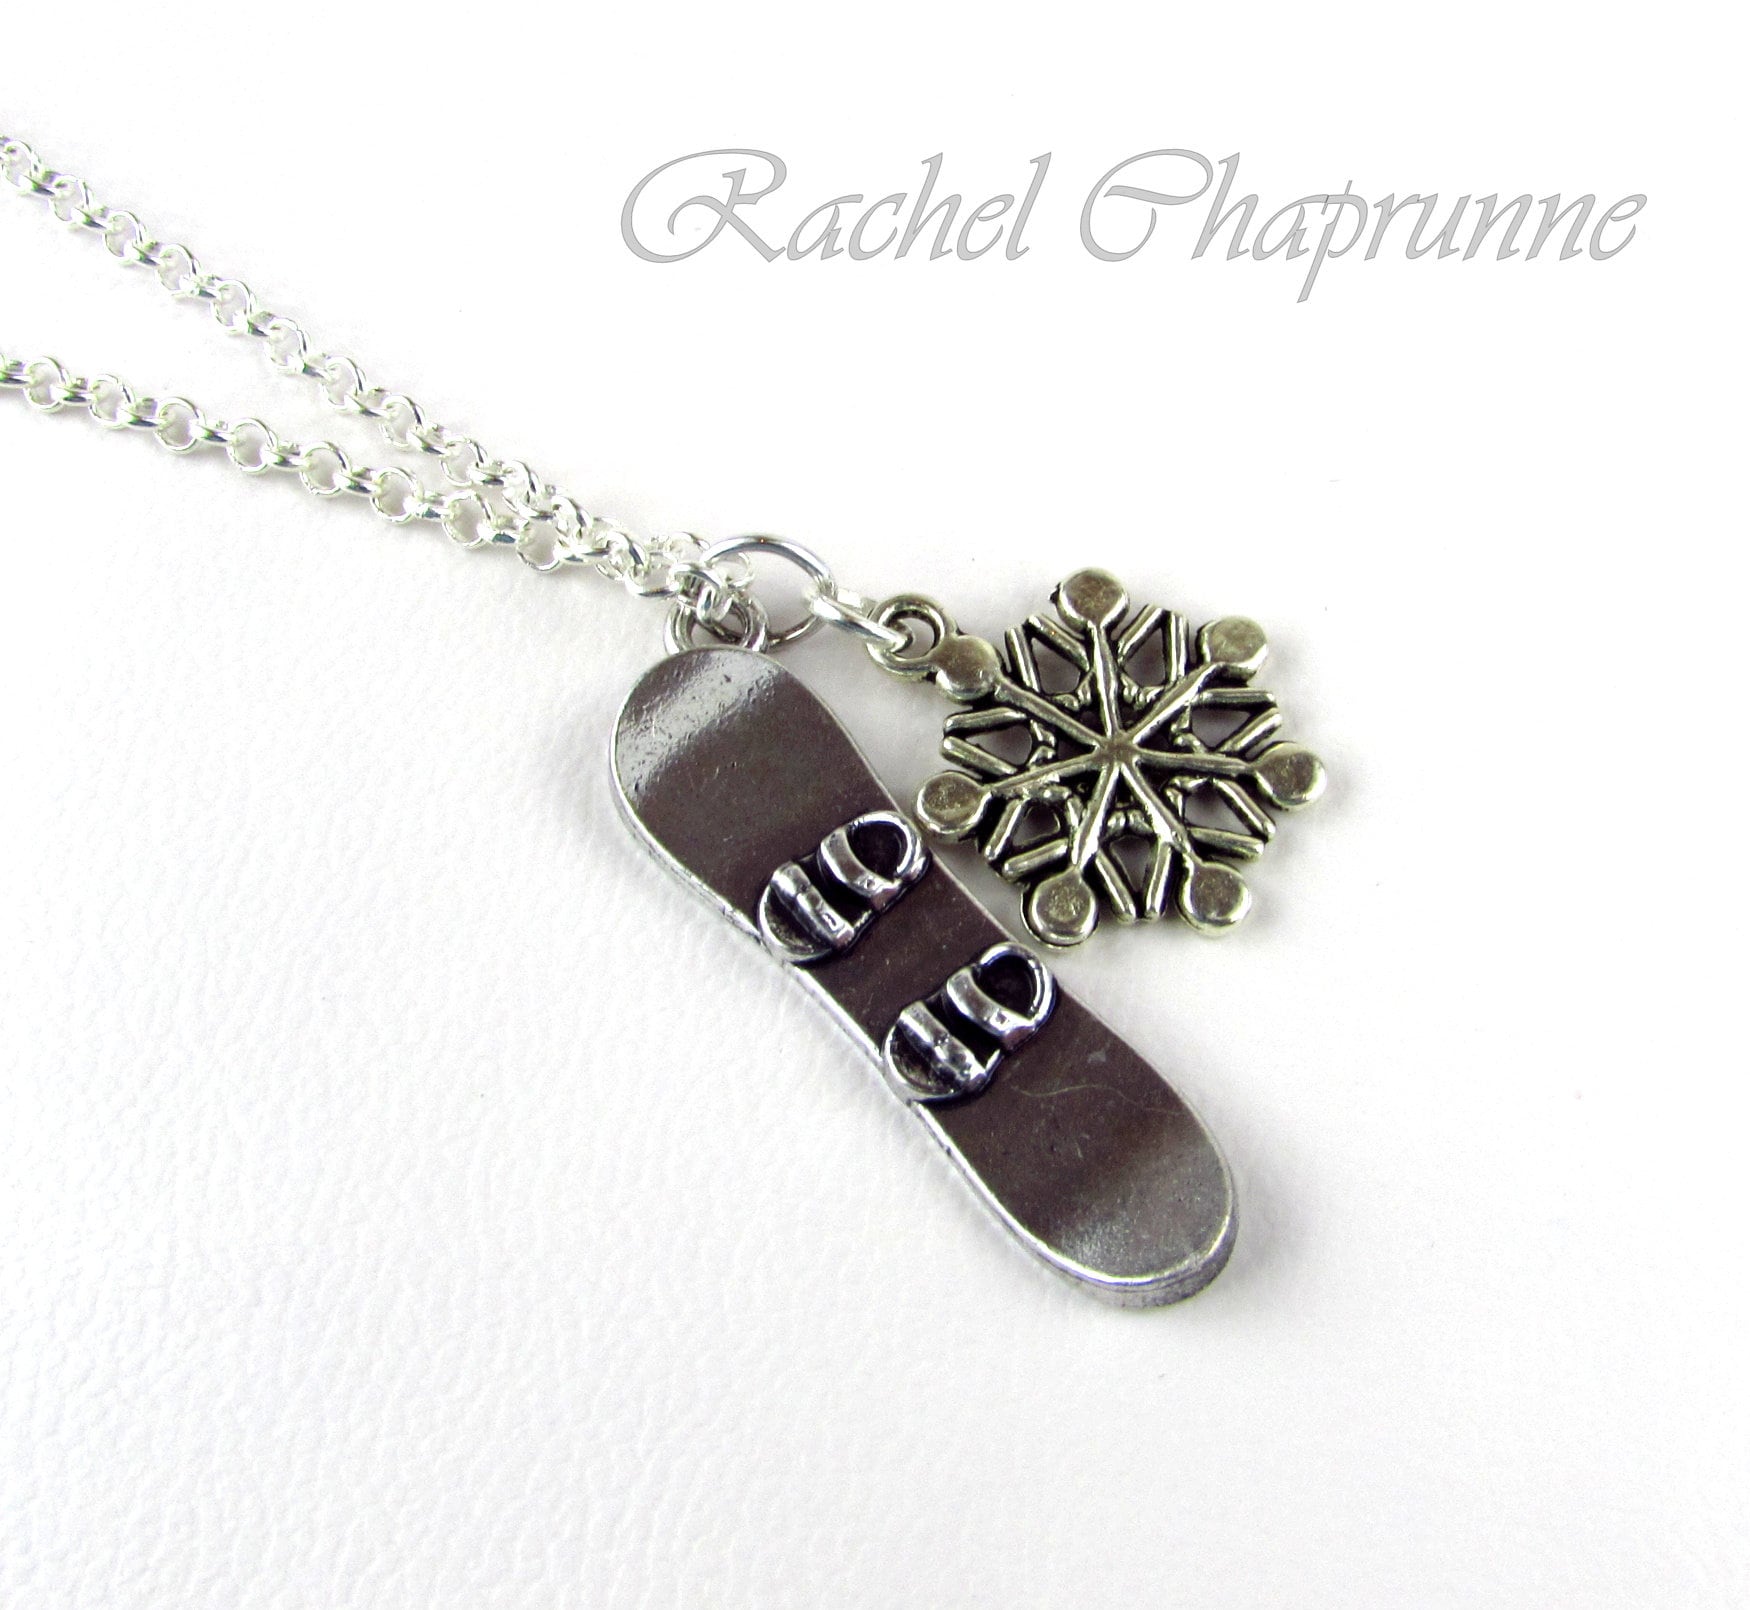 Snowflake jewellery Winter wedding gift Birthday necklace Skull Unique stocking filler Snow gift Ski present Personalized jewelry